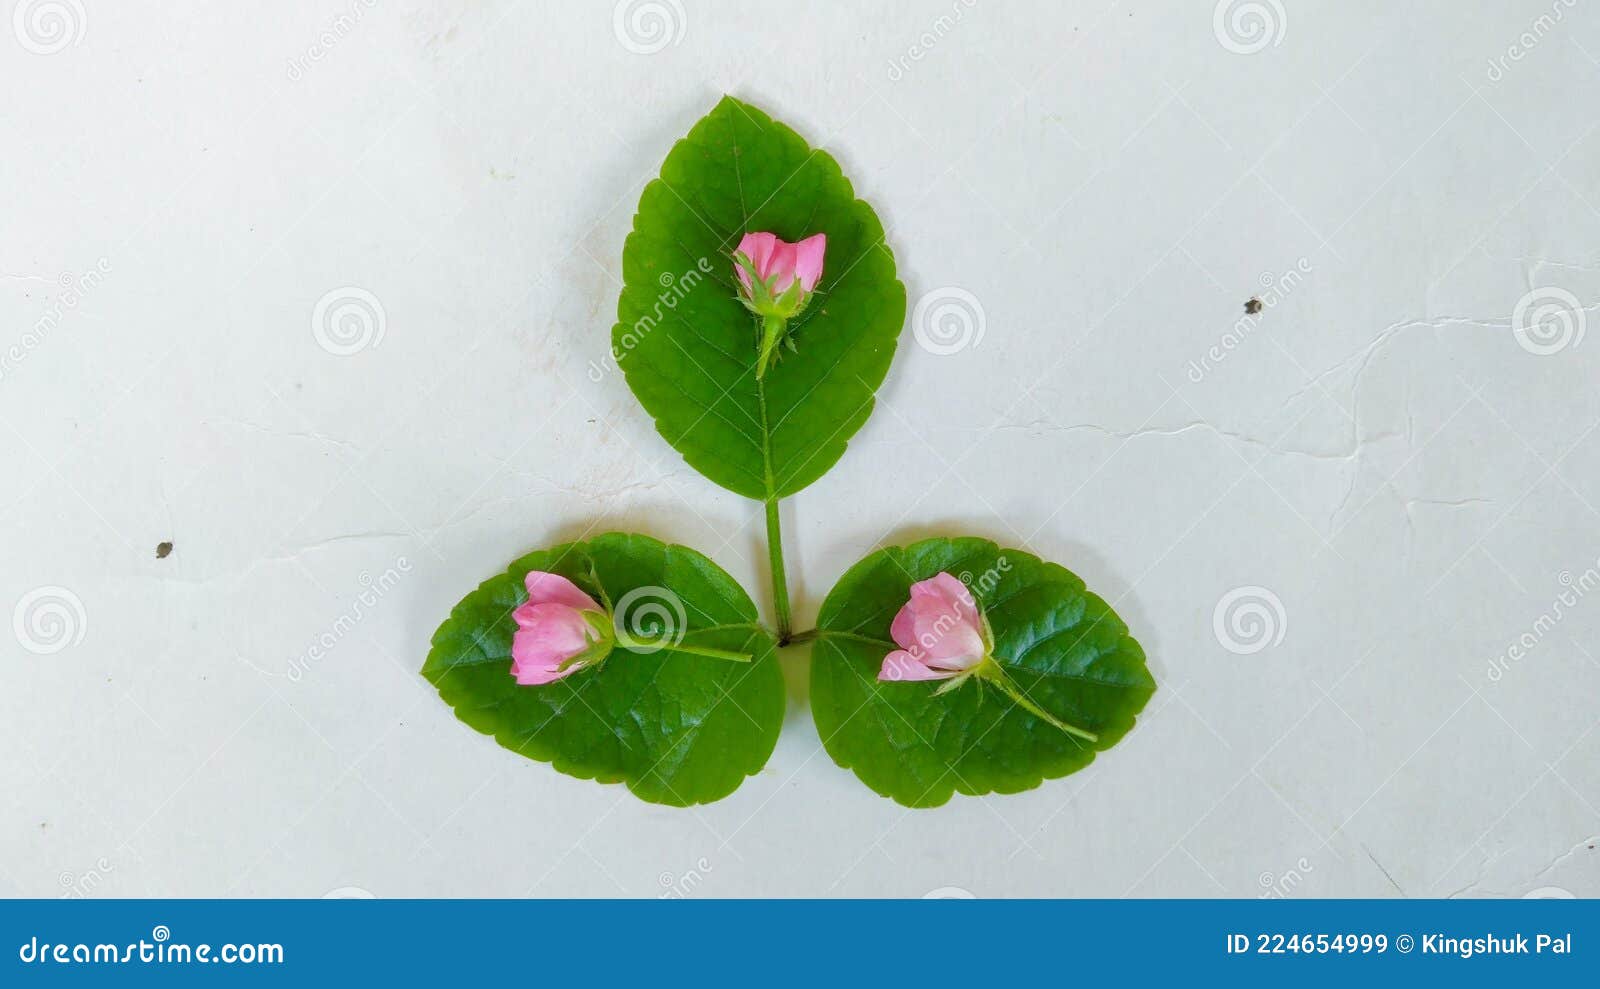 art of green leaf with small jangle flower's, white background